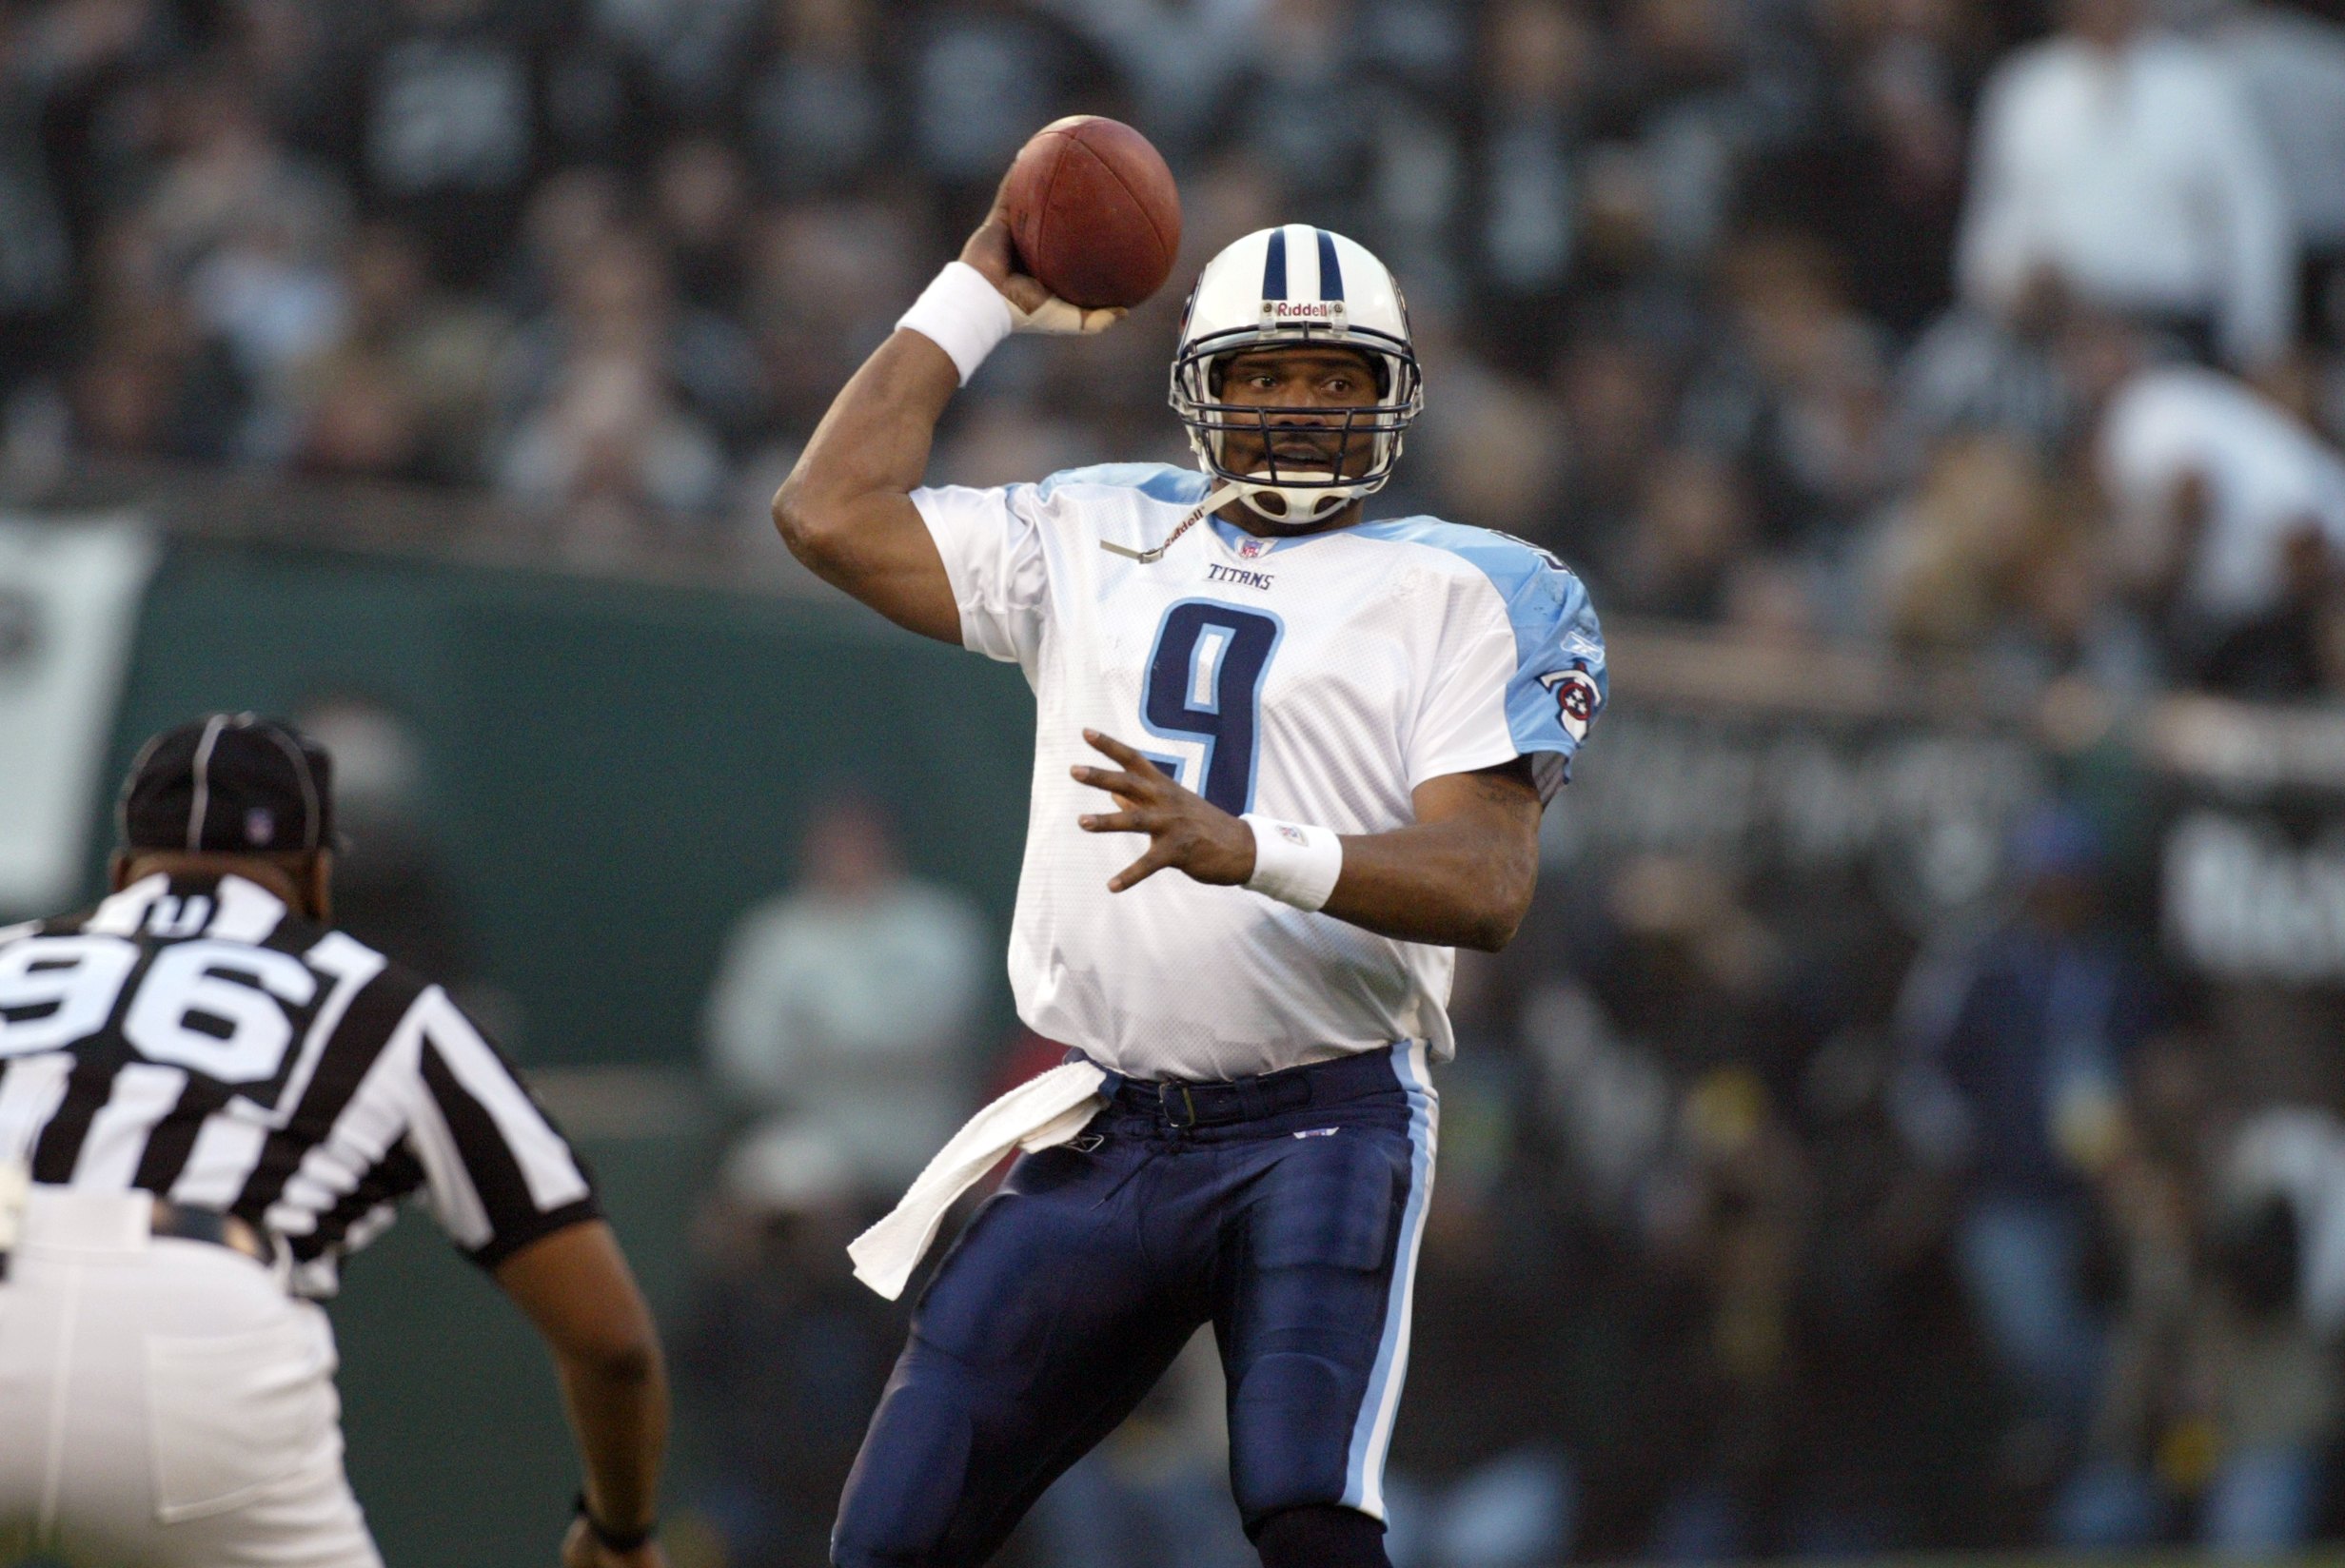 Should I Listen To This? - Steve McNair: Fall of a Titan